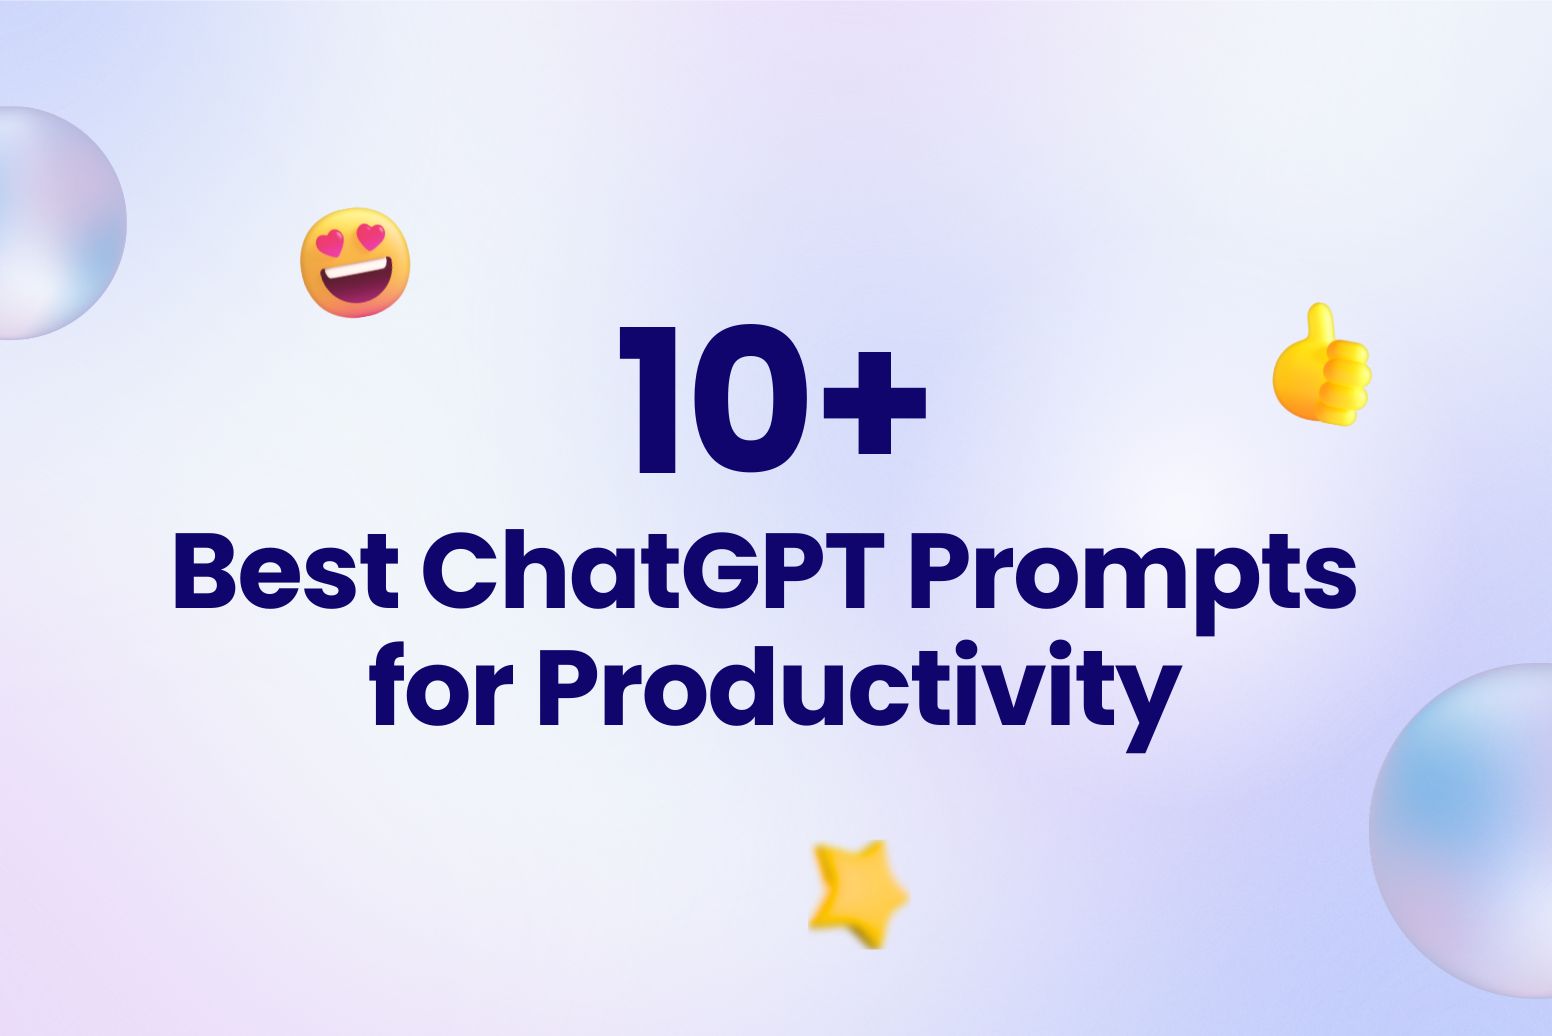 10+ Best ChatGPT Prompts for Productivity